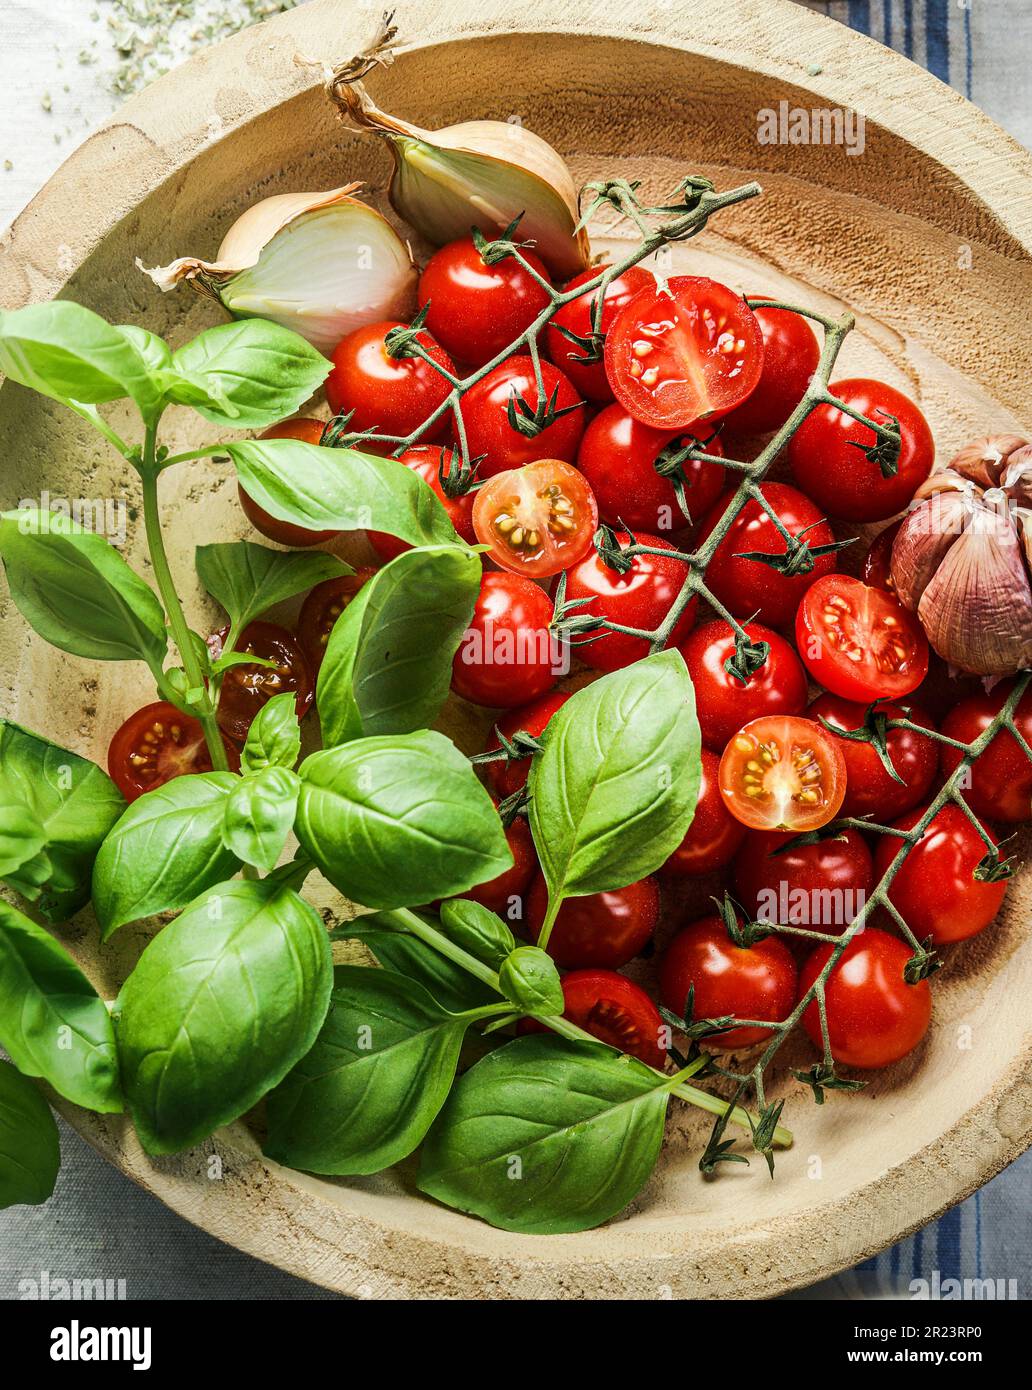 Tomatoes and basil in wooden tray, top view. Cooking ingredients for Italian food Stock Photo